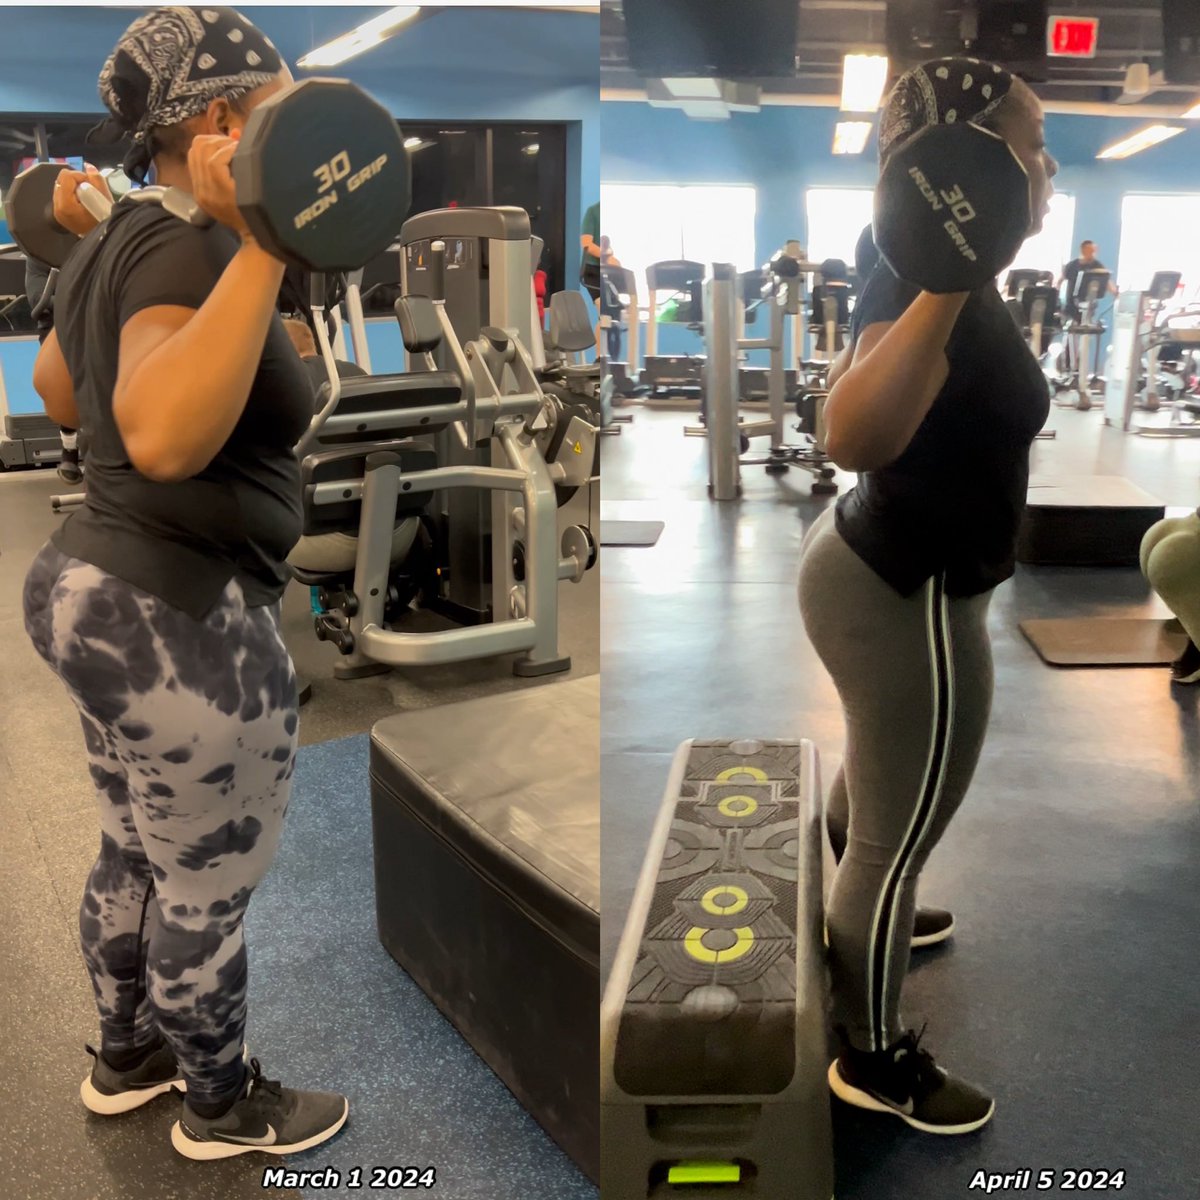 My client one month after training with me in person, our bodies can do amazing things when we lock in